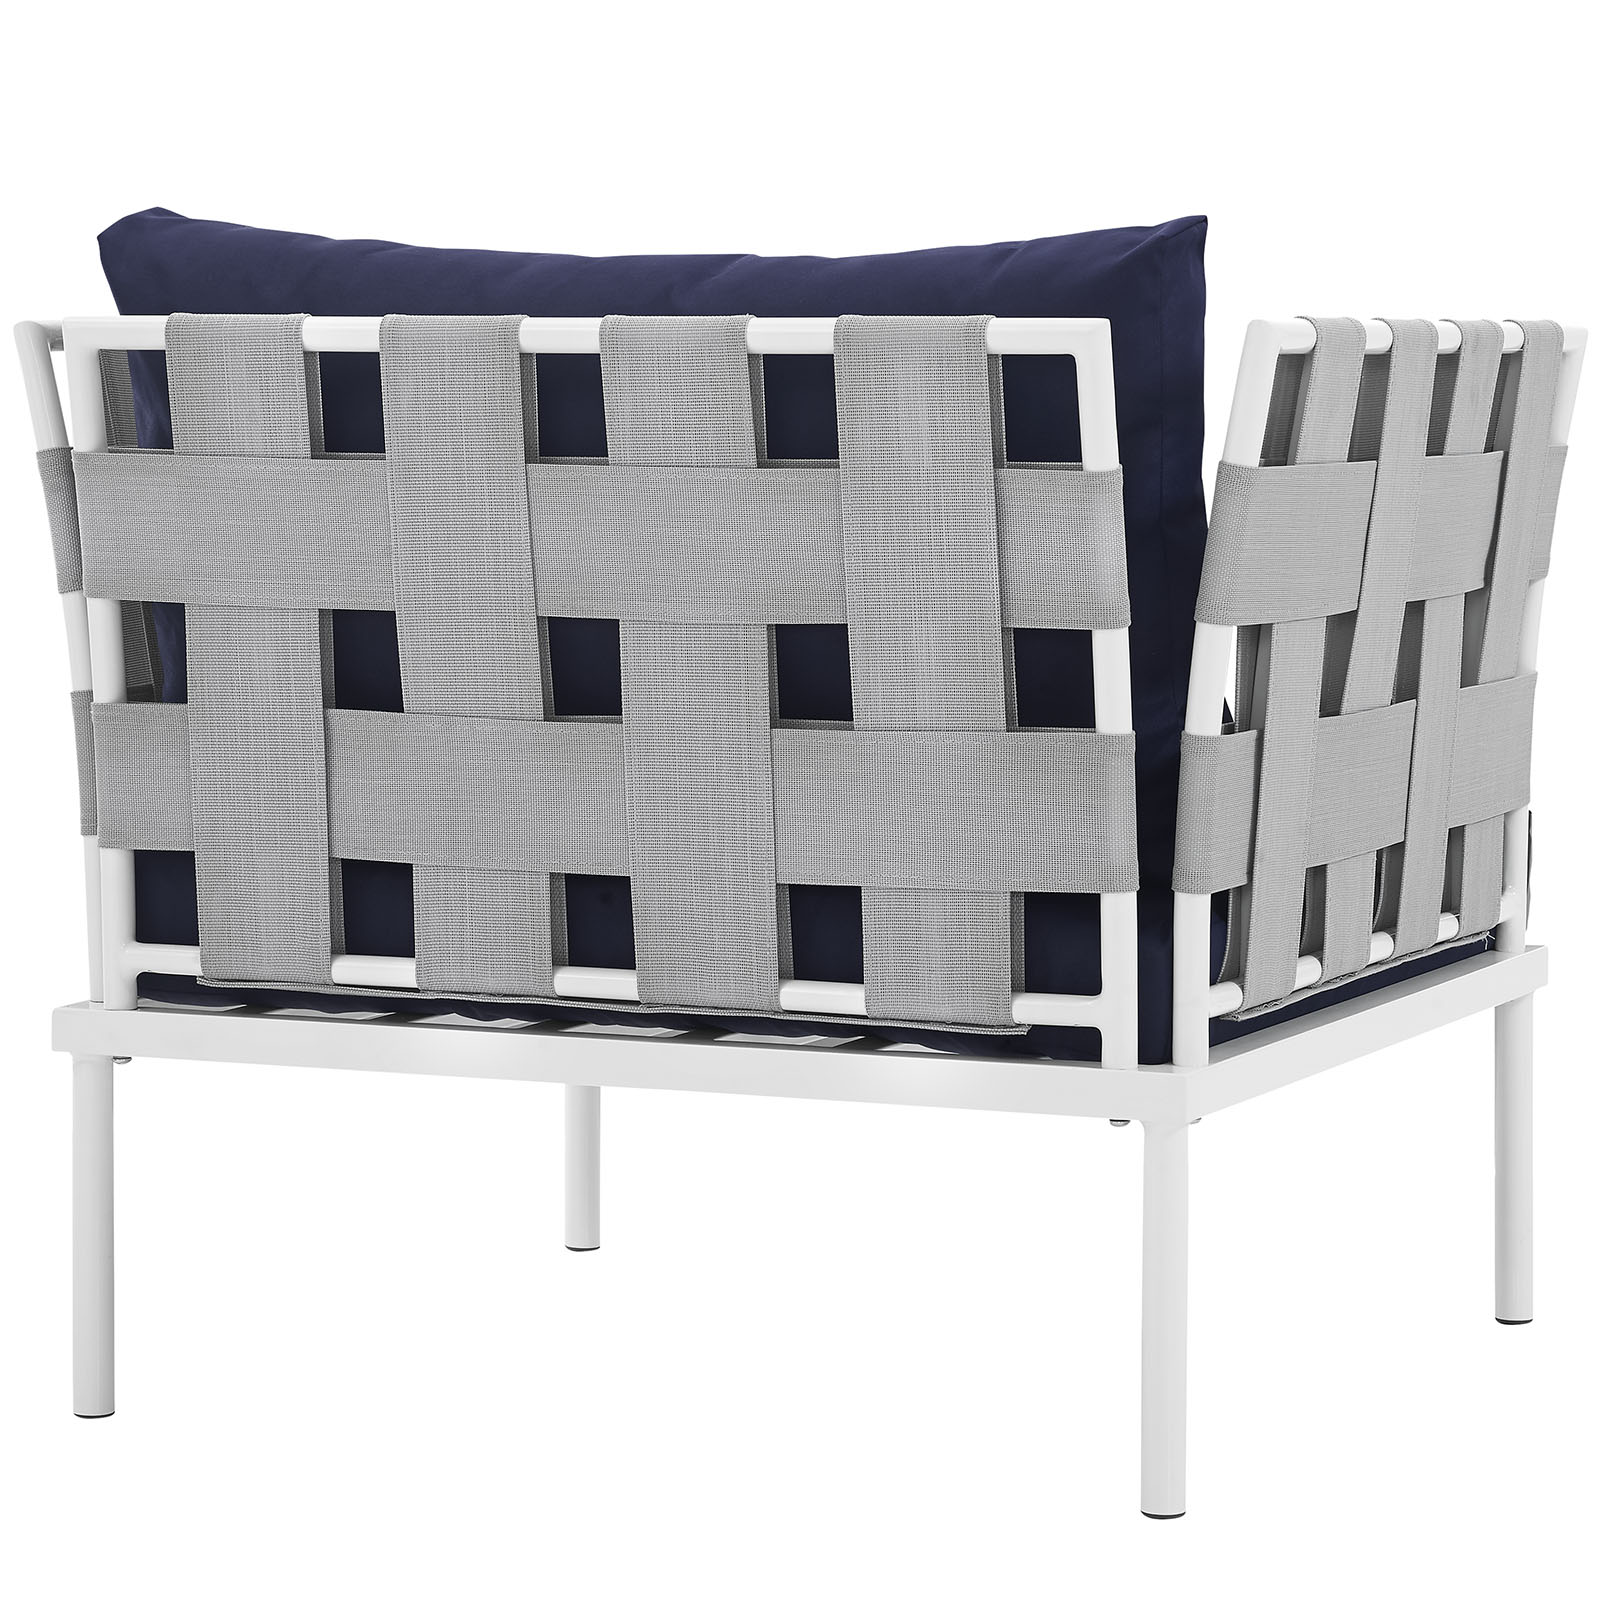 Modern Contemporary Urban Design Outdoor Patio Balcony Lounge Chair, Navy Blue White, Rattan - image 4 of 5